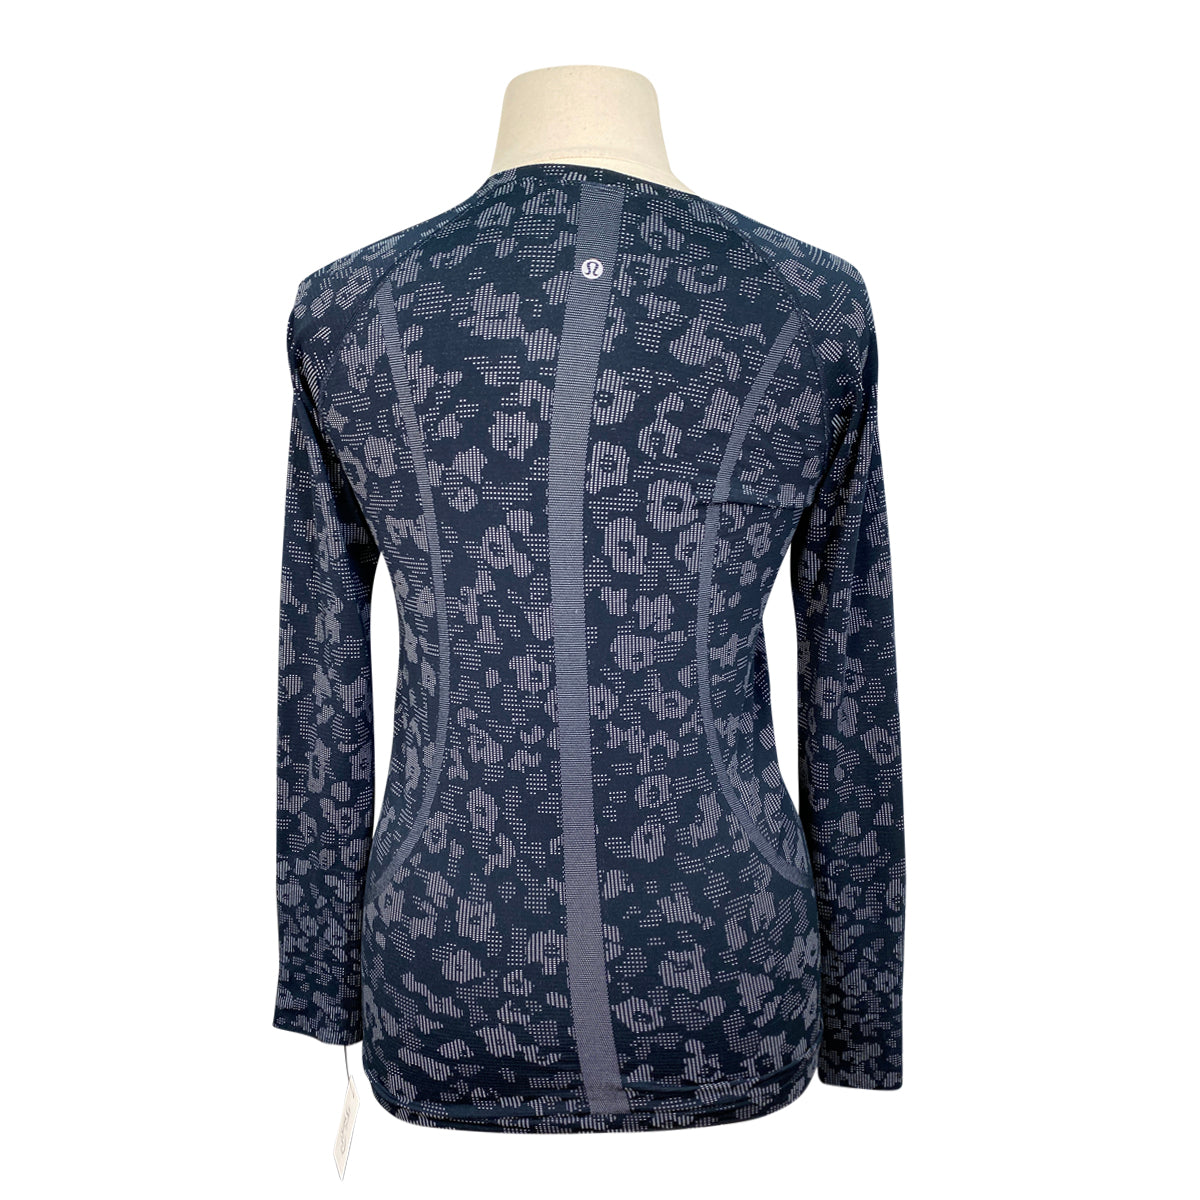 Lululemon 'Swiftly' Tech Long Sleeve 2.0 in Navy Floral